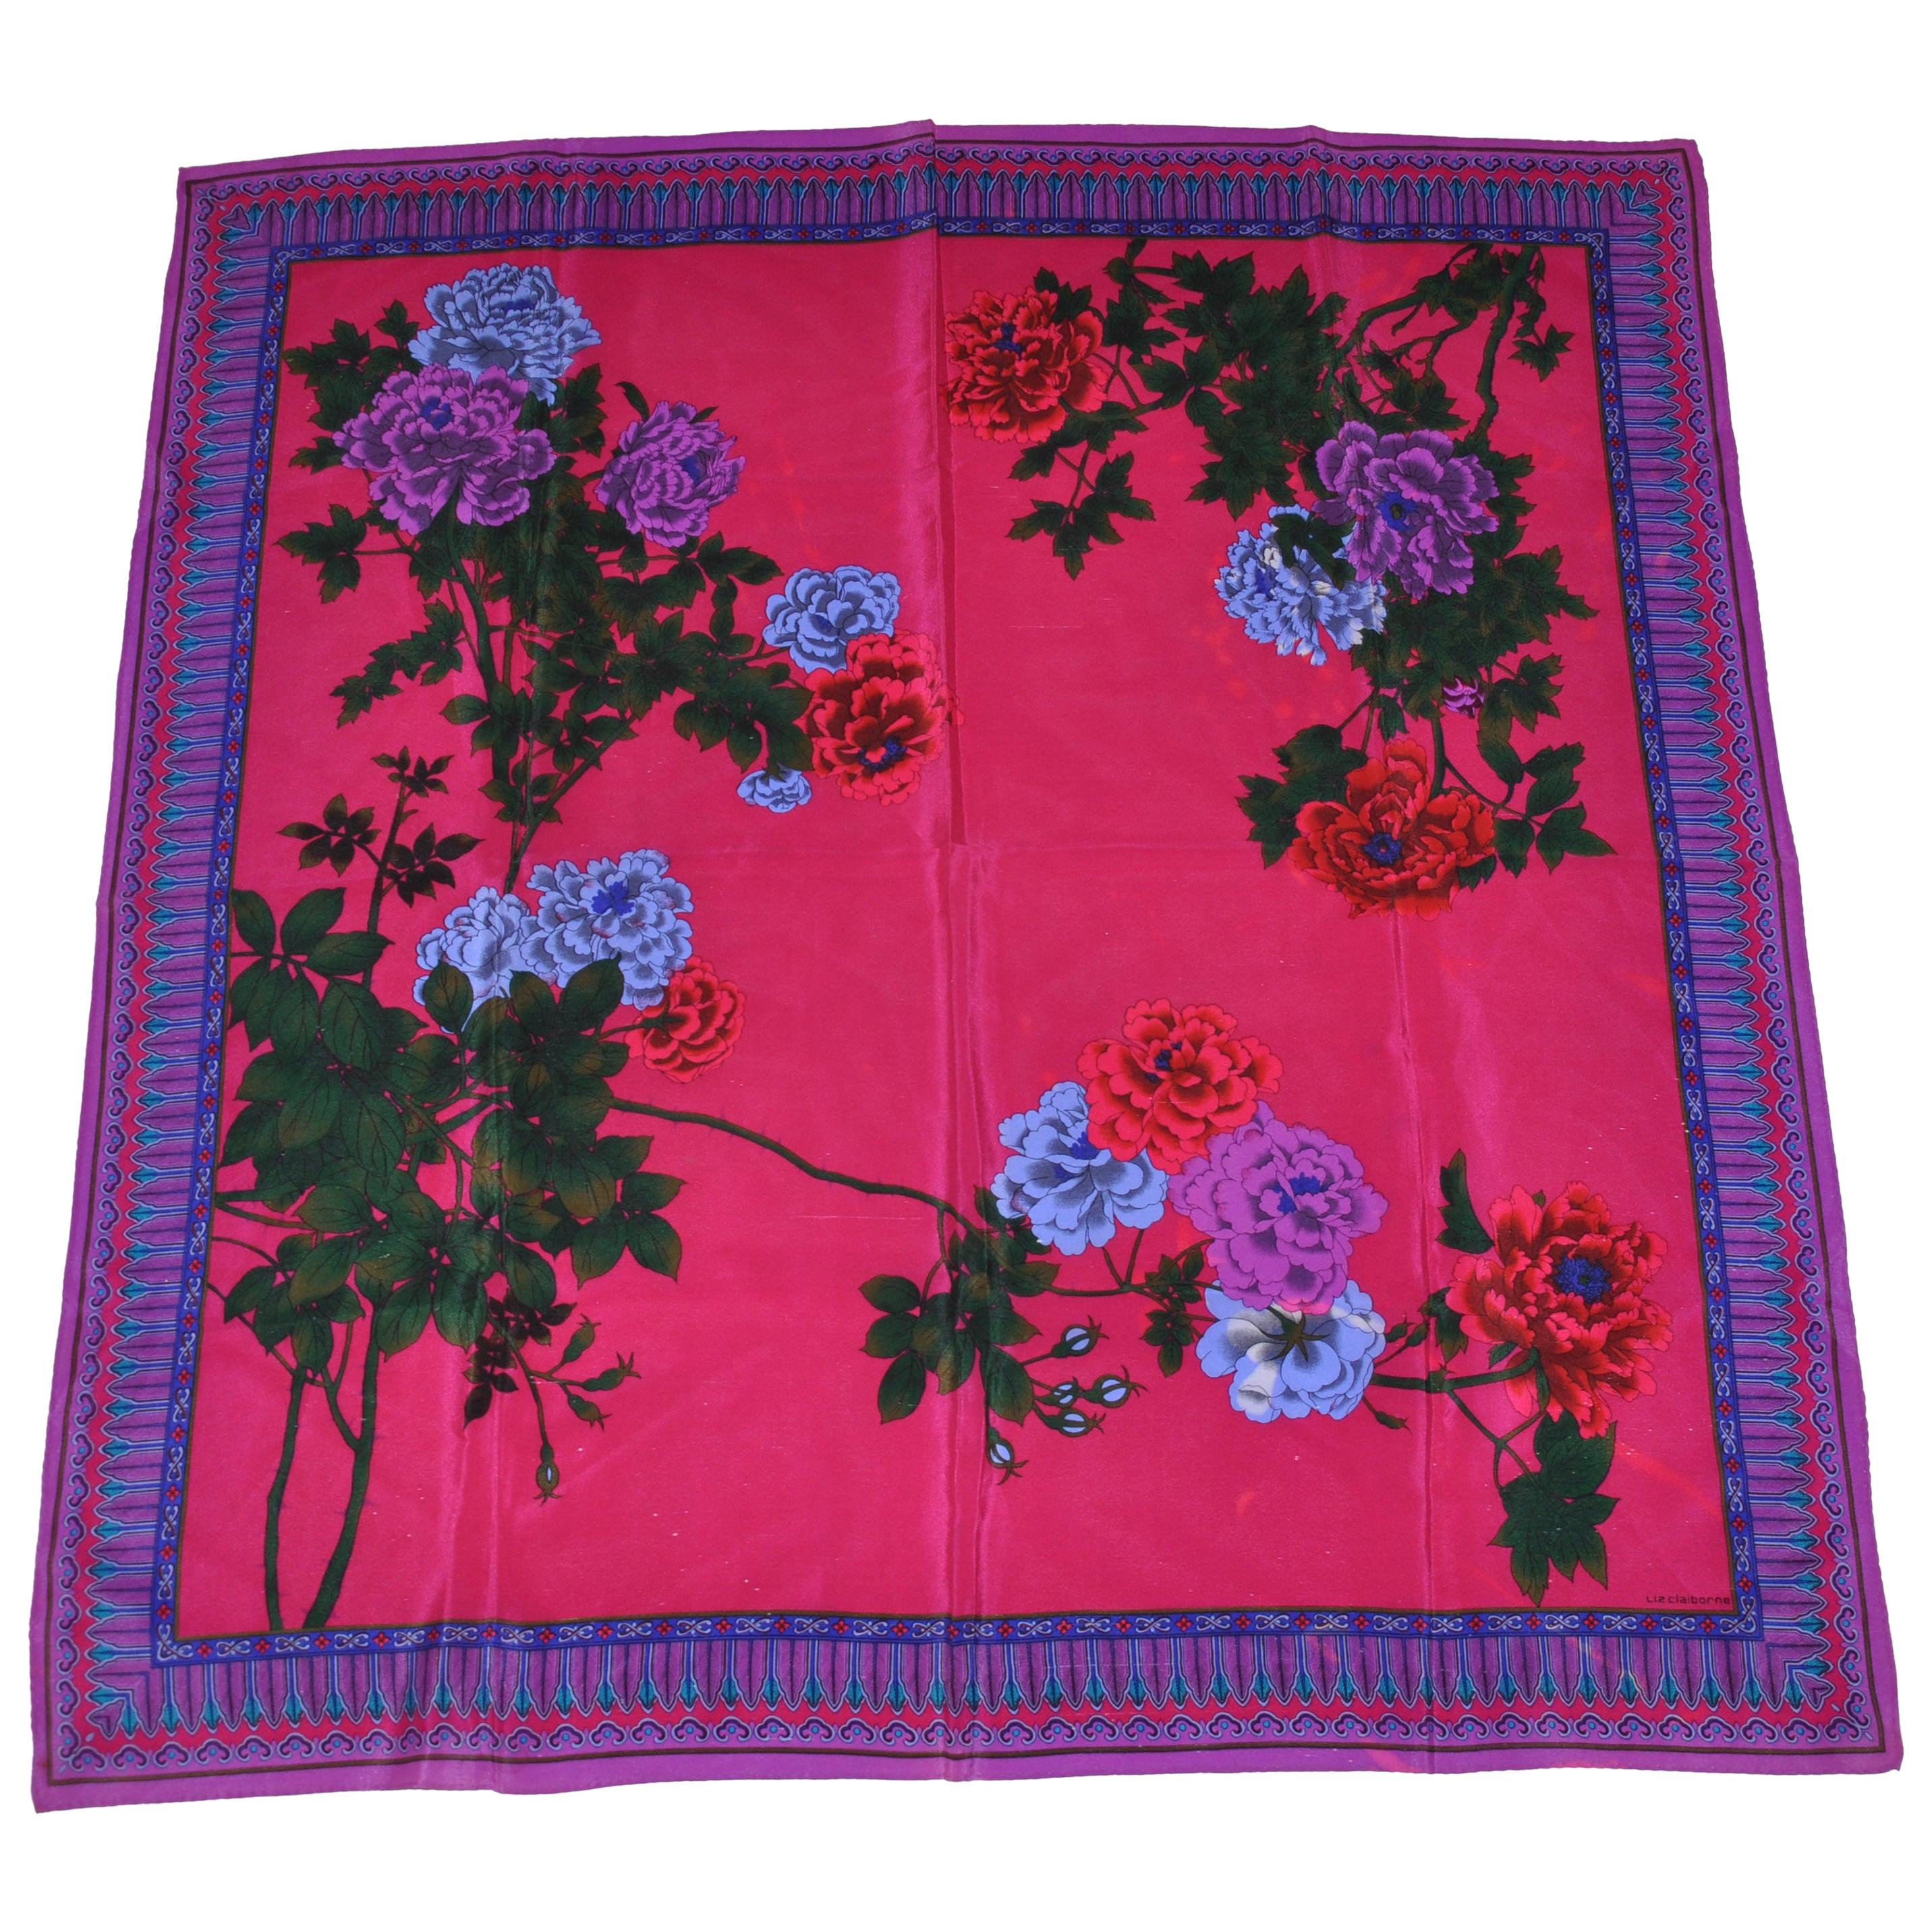 Beautiful Winter Florals With Multi "Feathers Borders" Silk Scarf